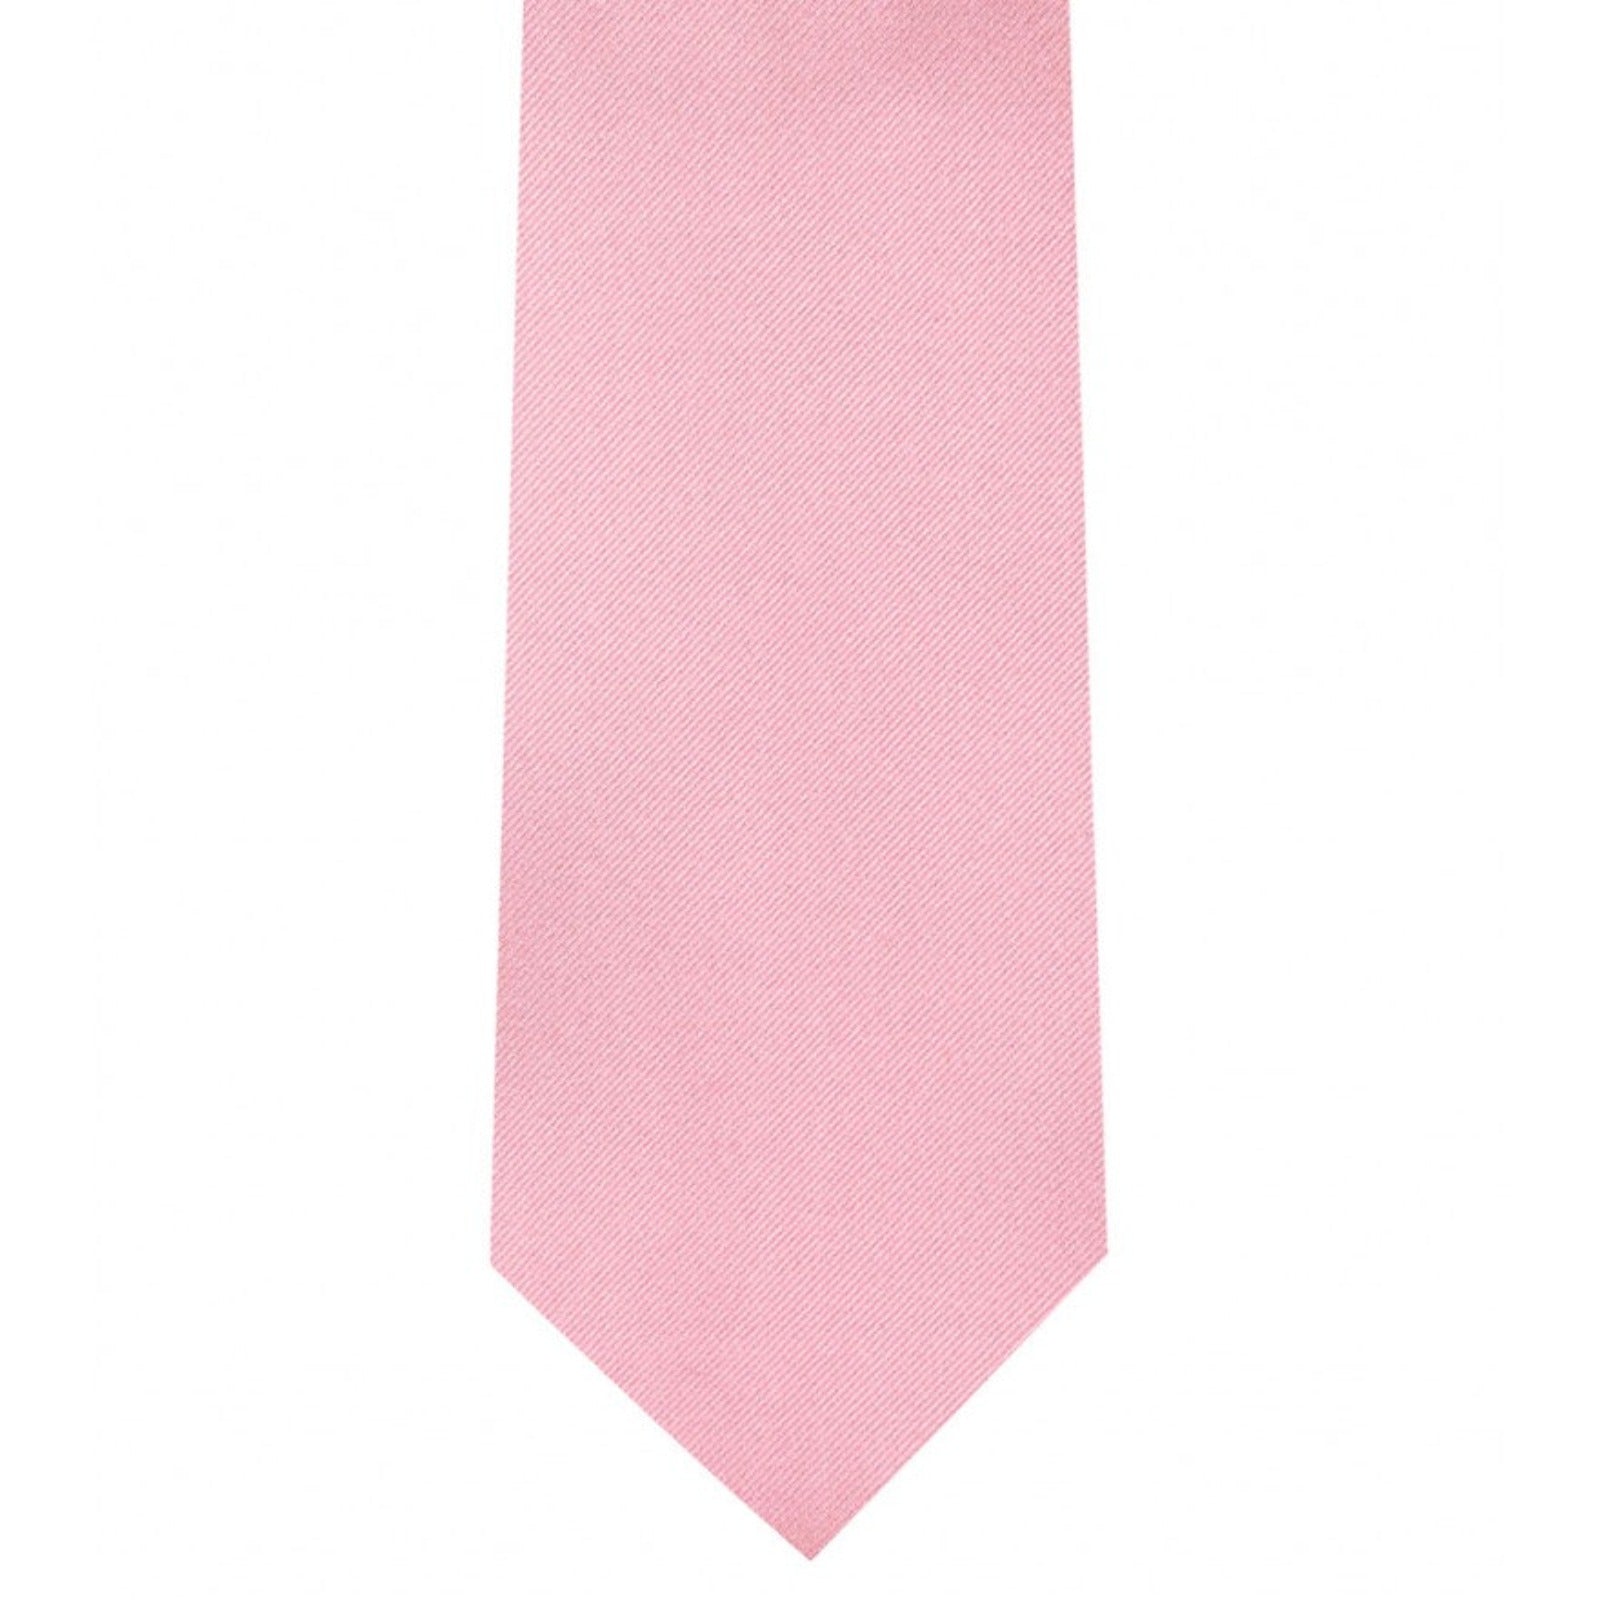 Classic Pink Tie Ultra Skinny tie width 2.25 inches With Matching Pocket Square | KCT Menswear